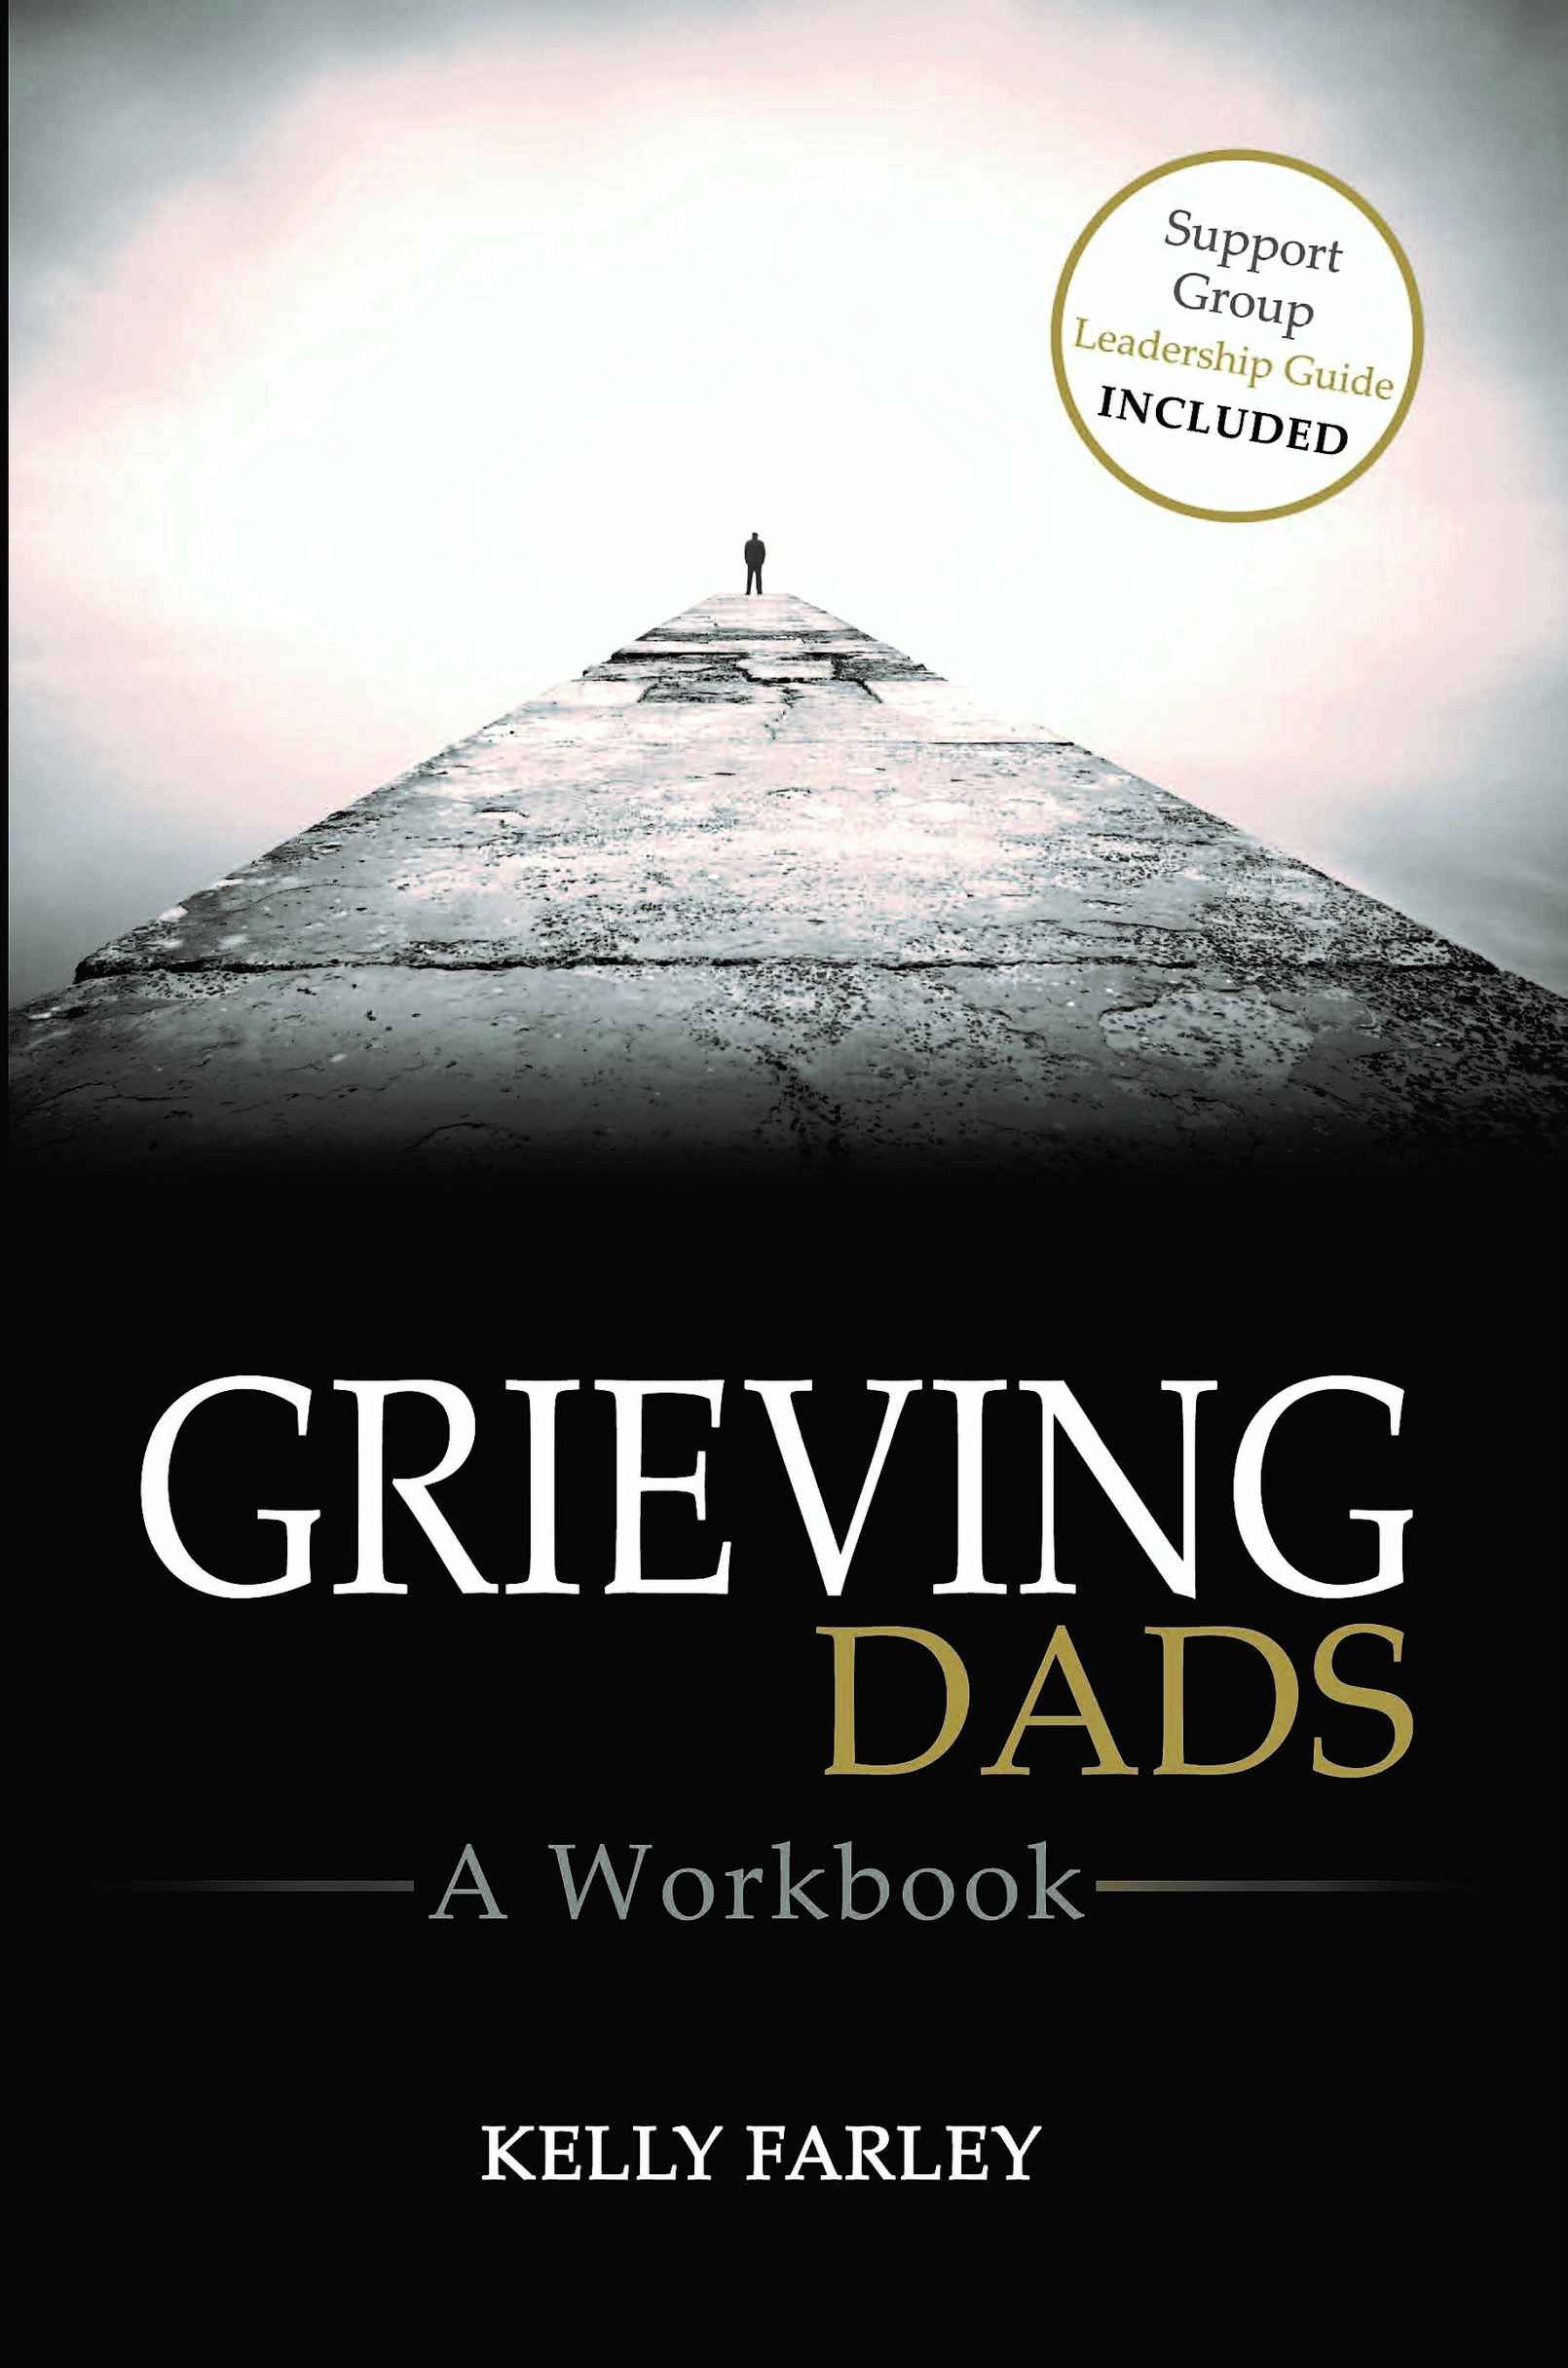 !FINAL - Workbook - Grieving Dads_Cover